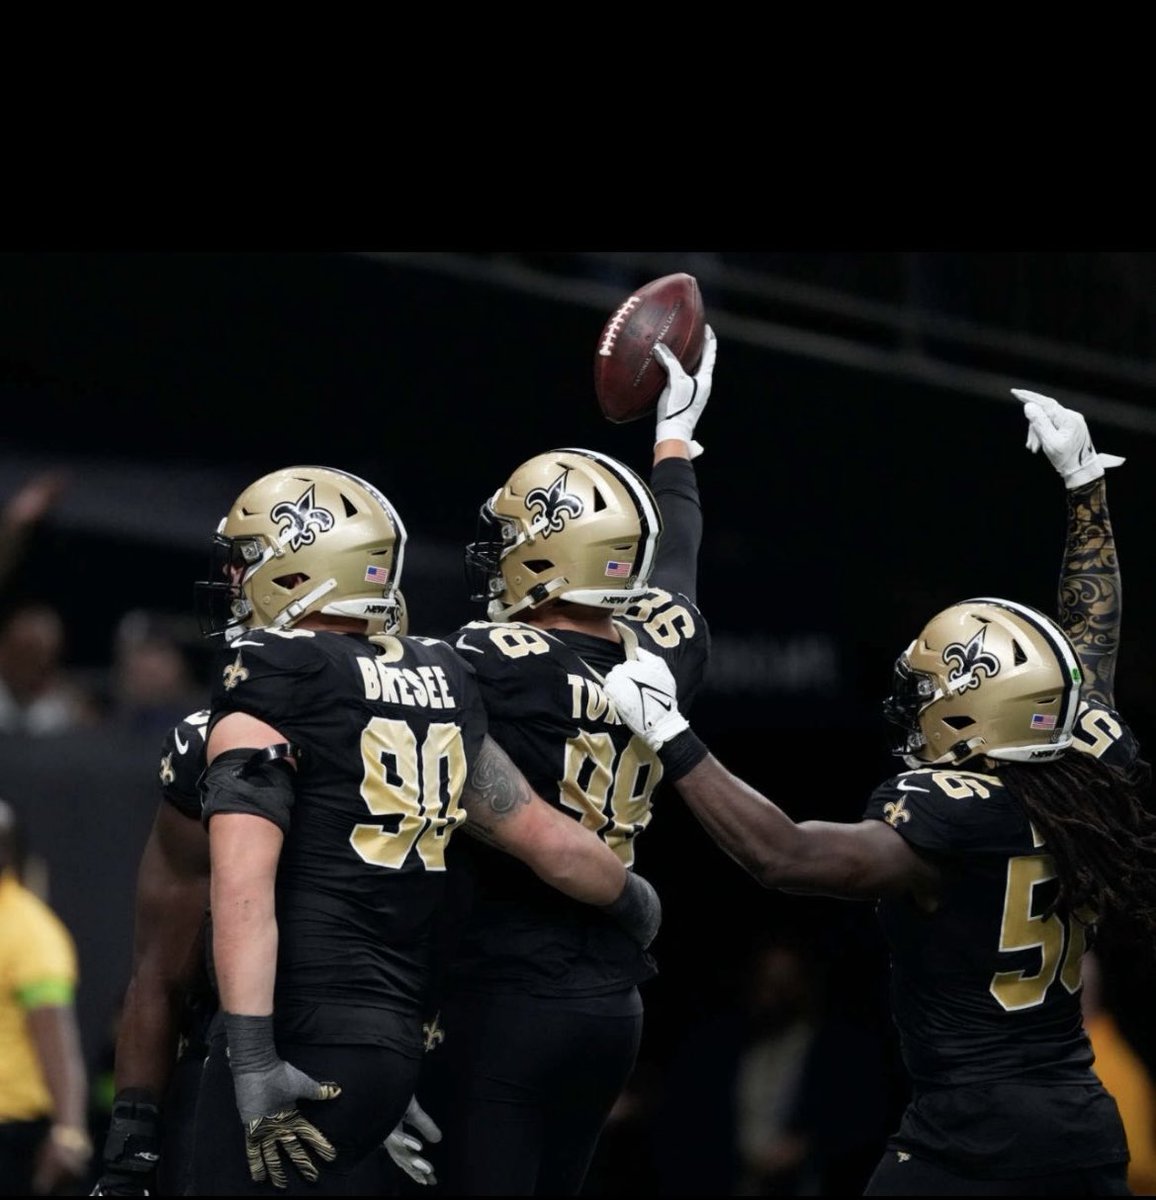 Proud of my nephew #98 Payton Turner’s fumble recovery in tonight’s Victory over the Atlanta Falcons ⁦@pt_turner98⁩ ⁦⁦@Saints⁩ ⁦@F1⁩ #Ambassador